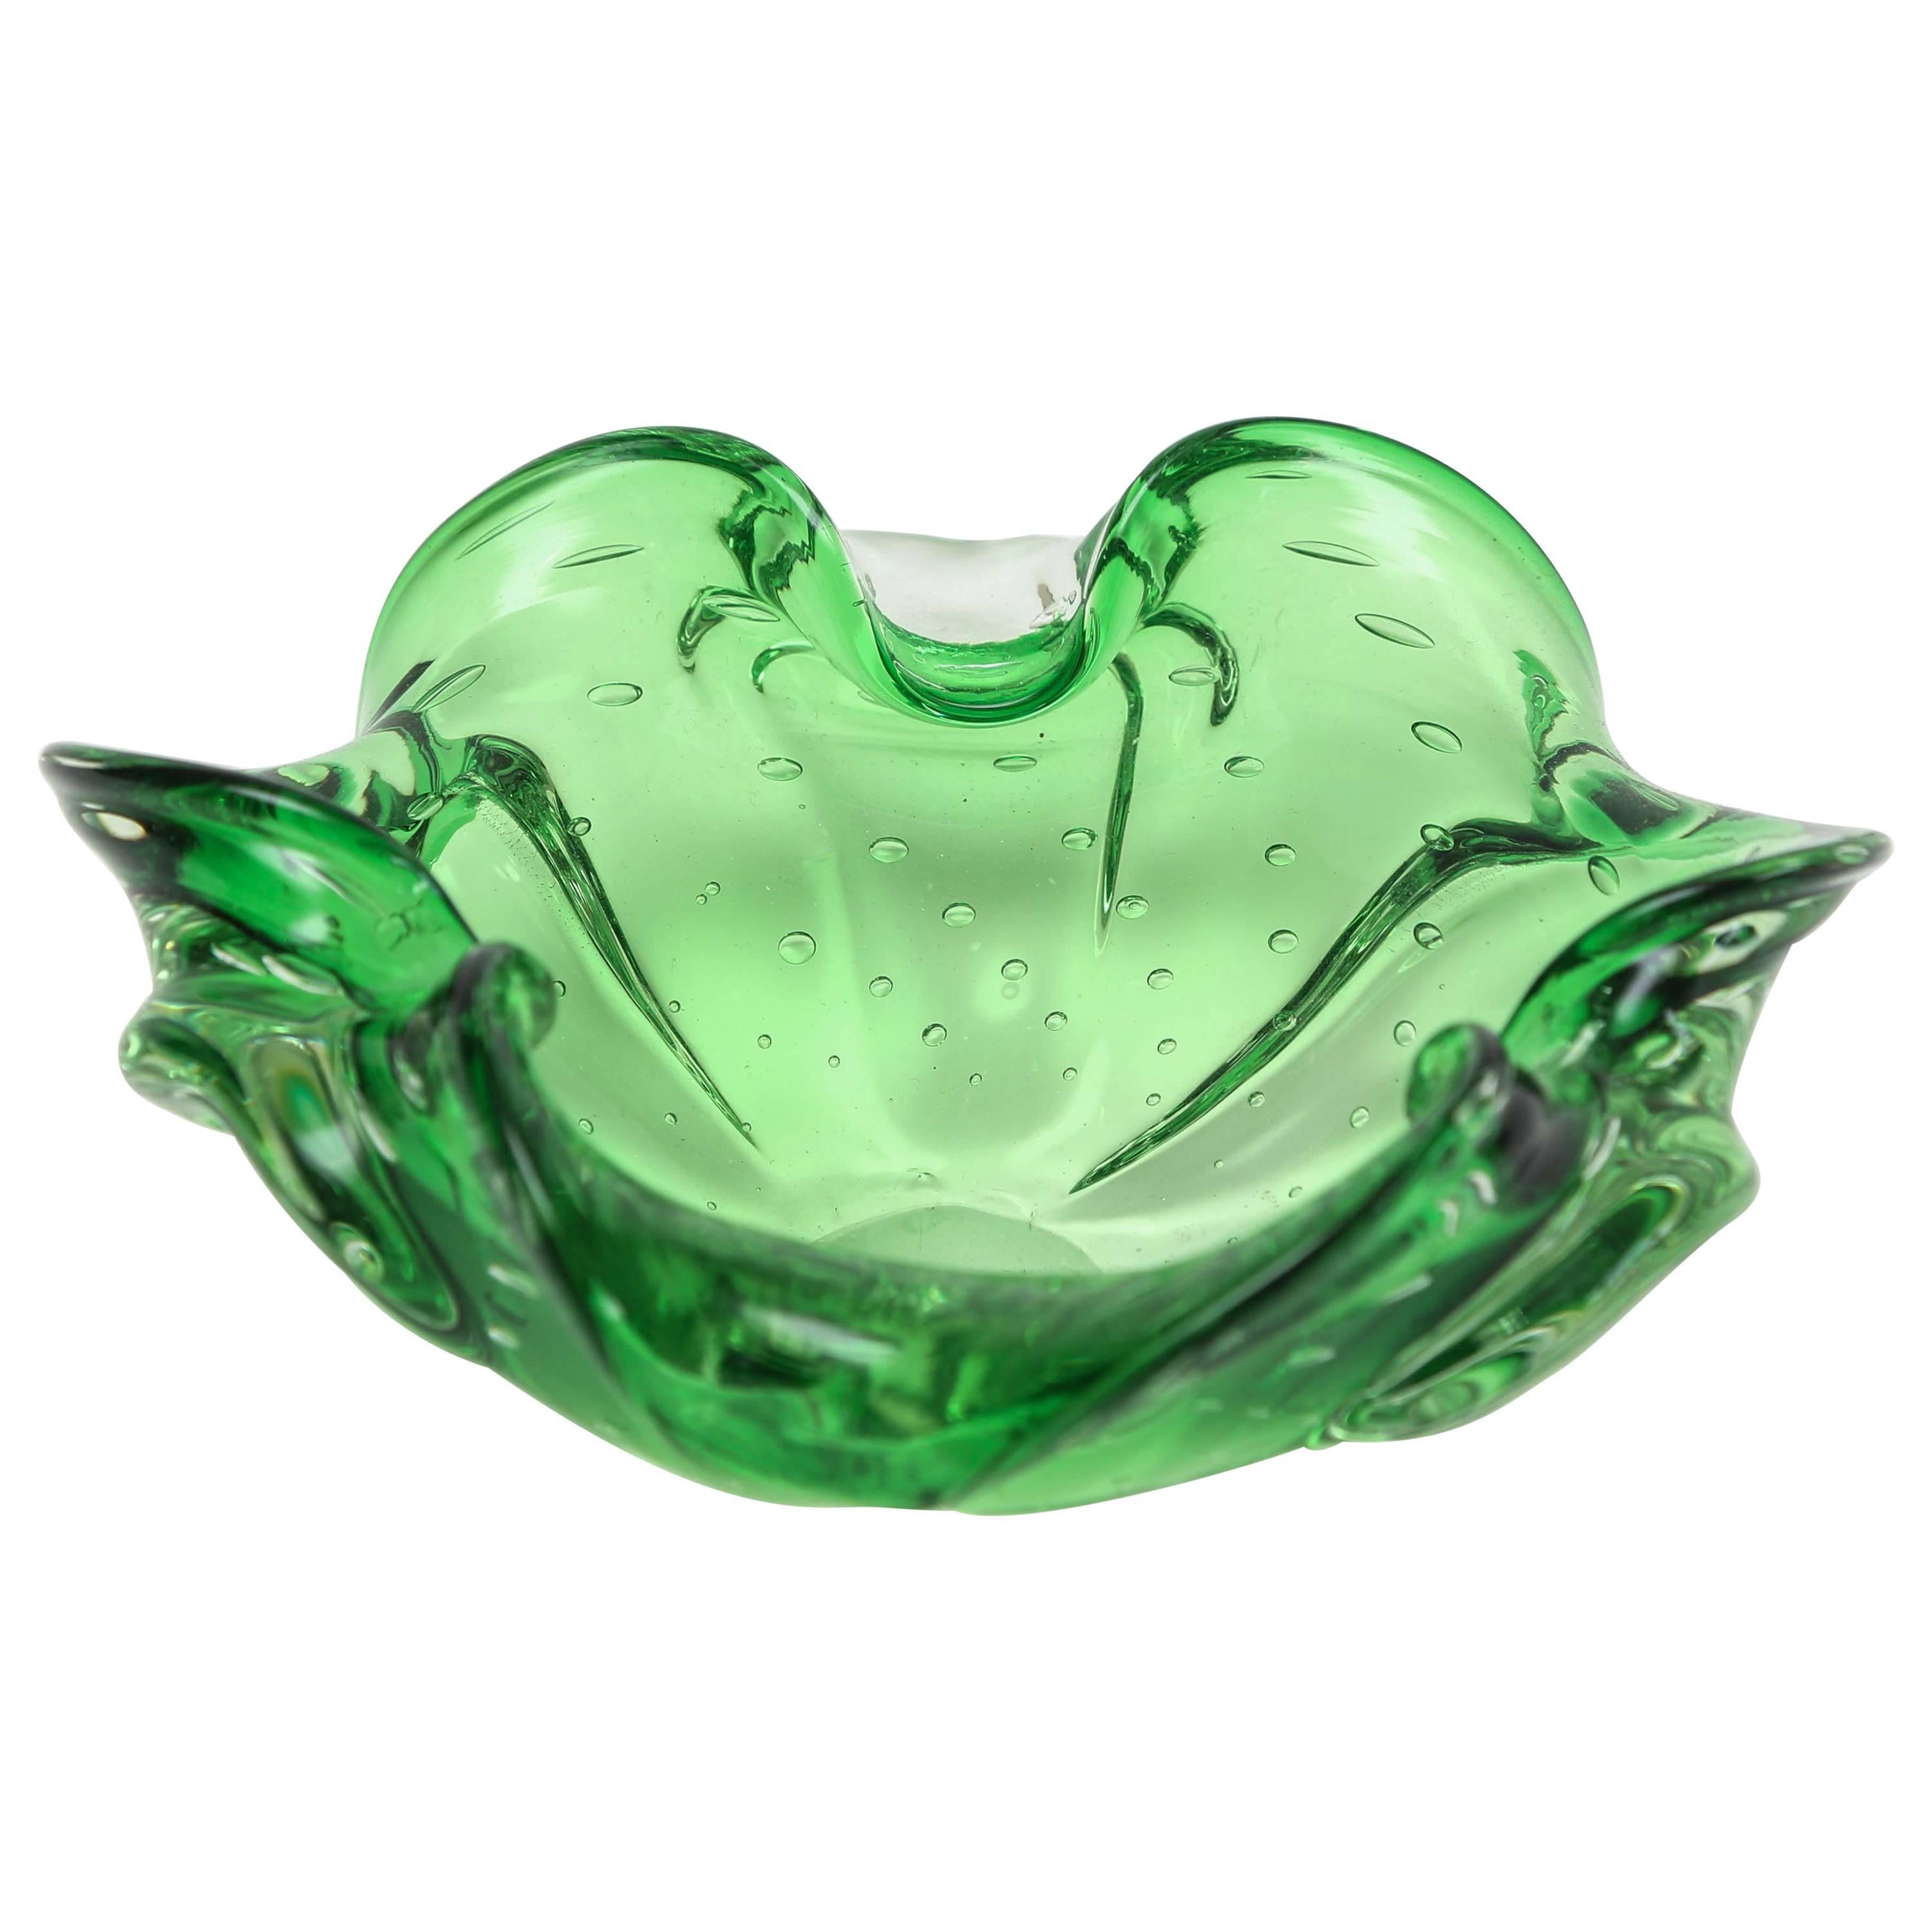 Green Murano Glass Dish or Bowl, 1960s, Italy